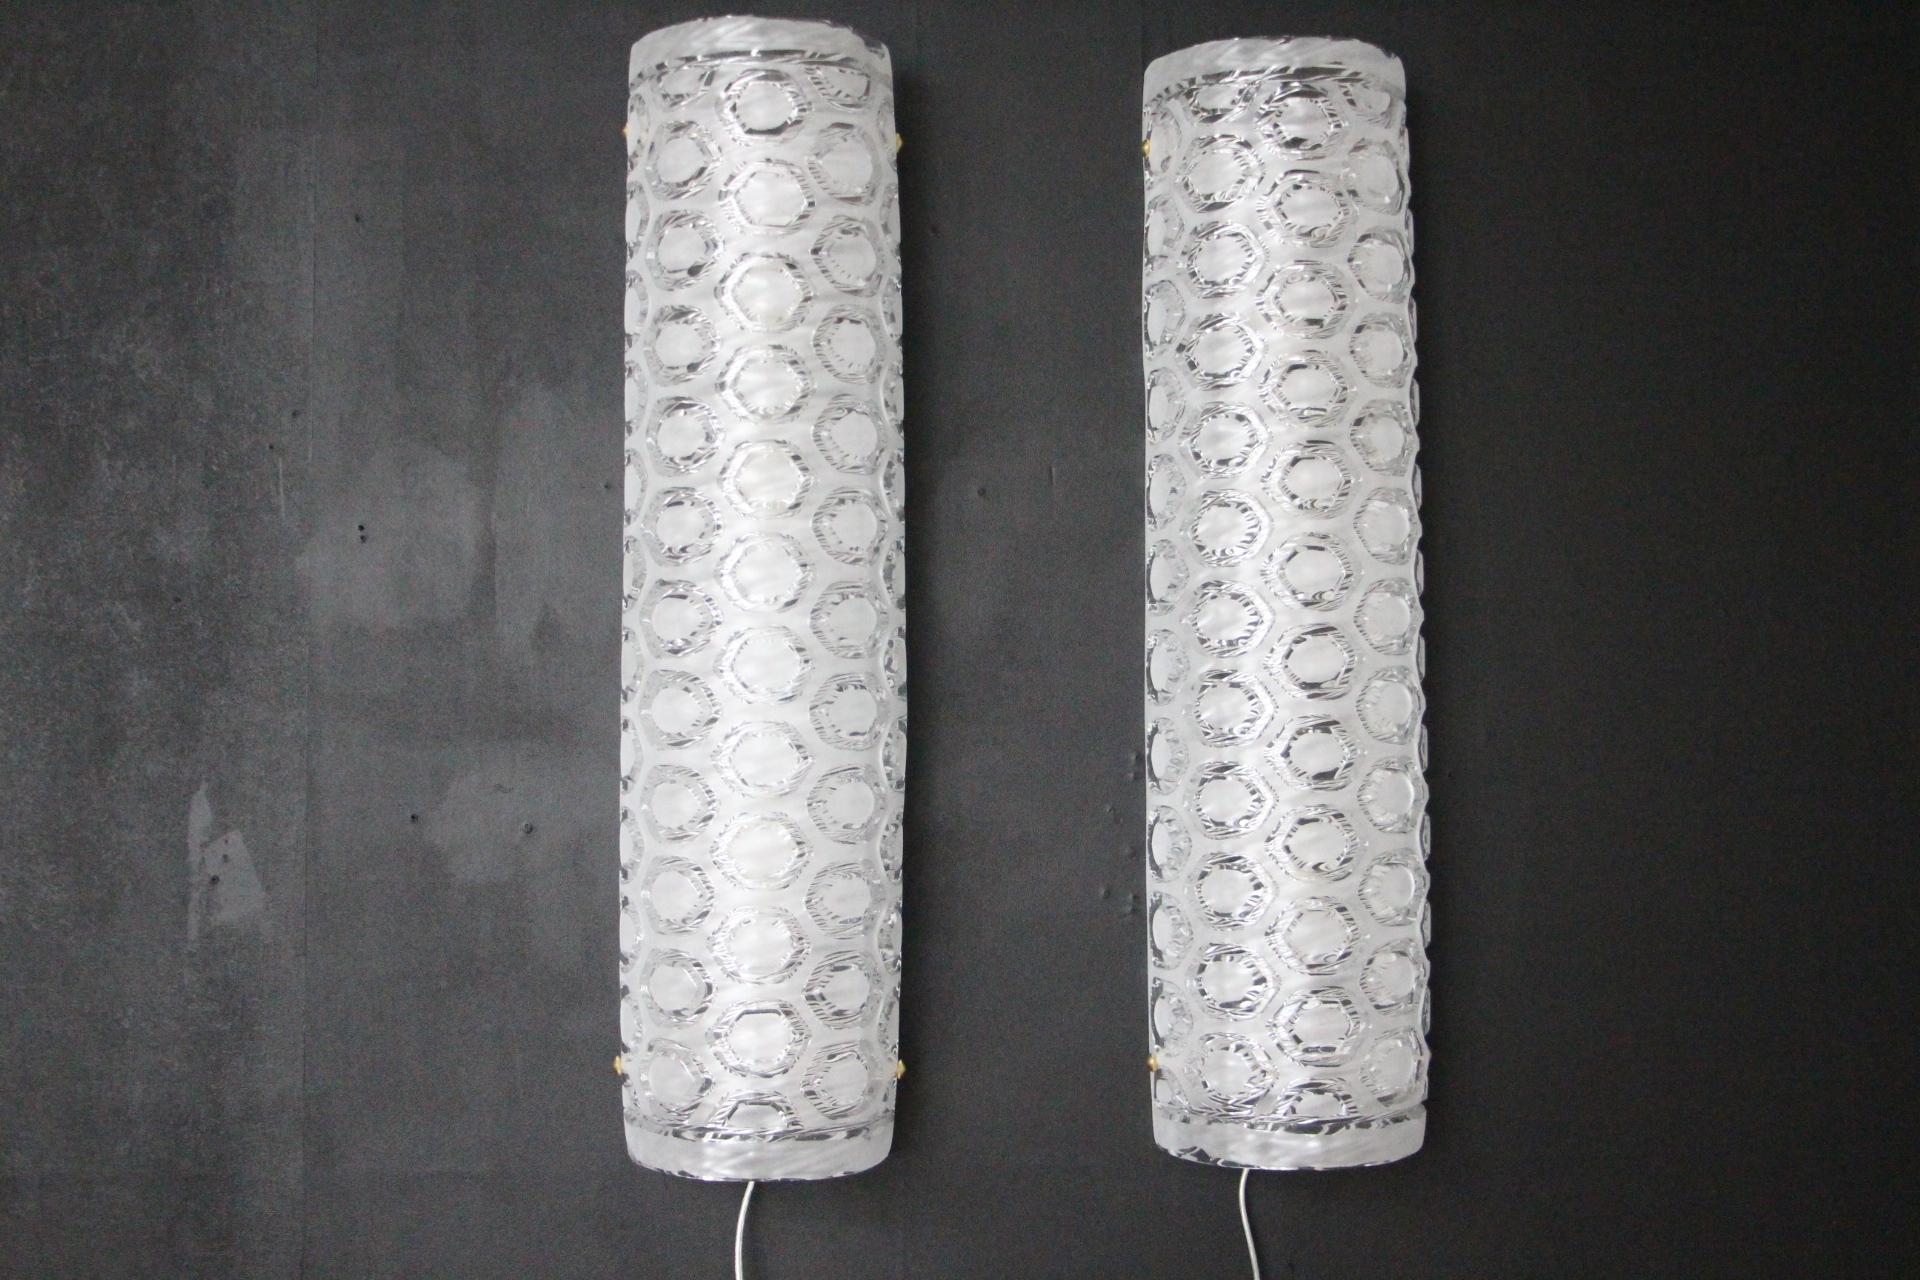 This pair of hand crafted wall lights features thick textured ice Murano glass cylinder shape with a geometric stamped pattern. It creates a unique and beautiful movement reminiscent of modern decors or Haute Couture, in the style of Pierre Cardin